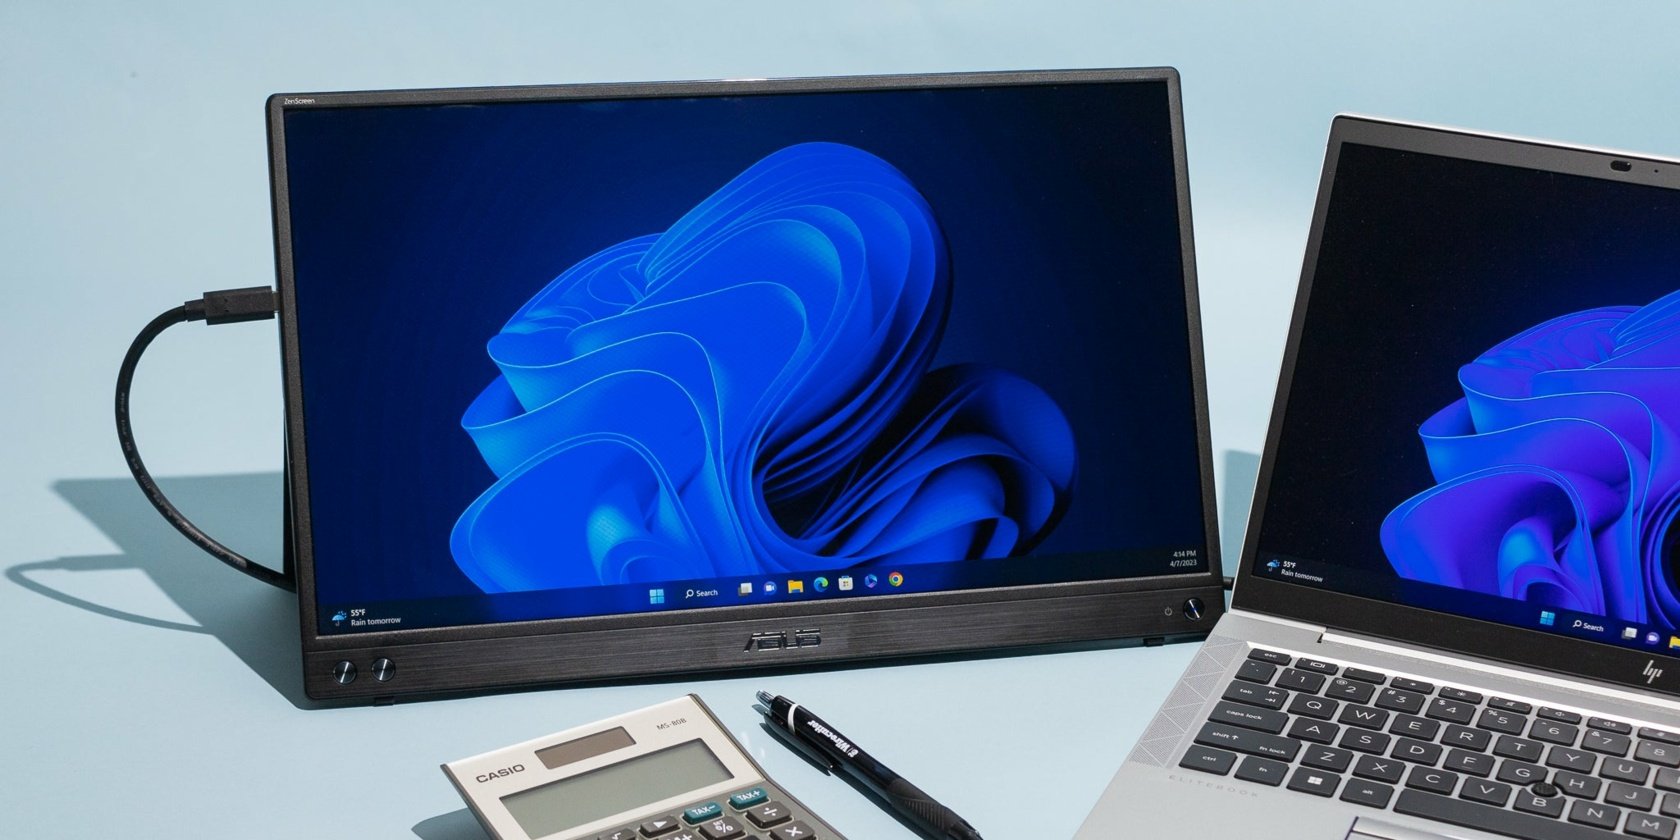 The best portable monitors 2024